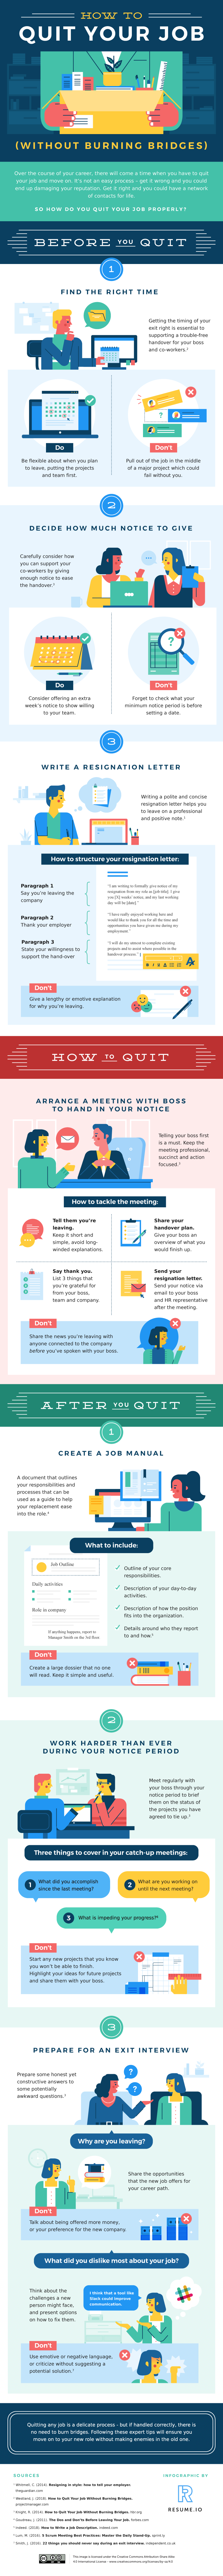 Want to Know How to Quit a Job? Here are some best practices for you - infographic